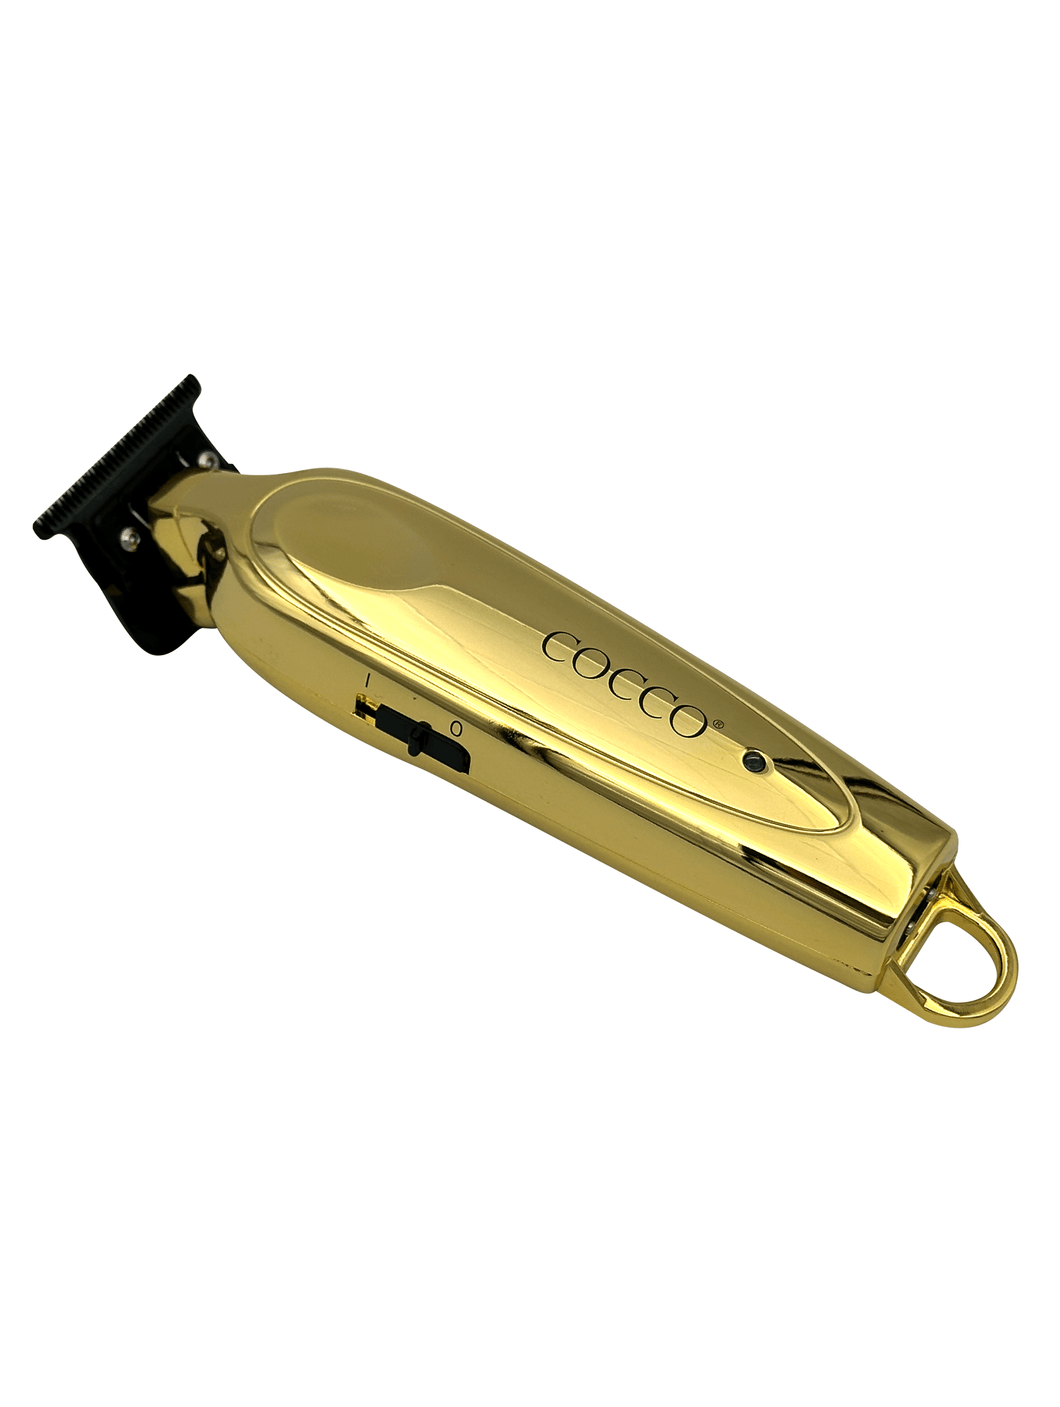 Cocco Pro BLDC Trimmer - Gold